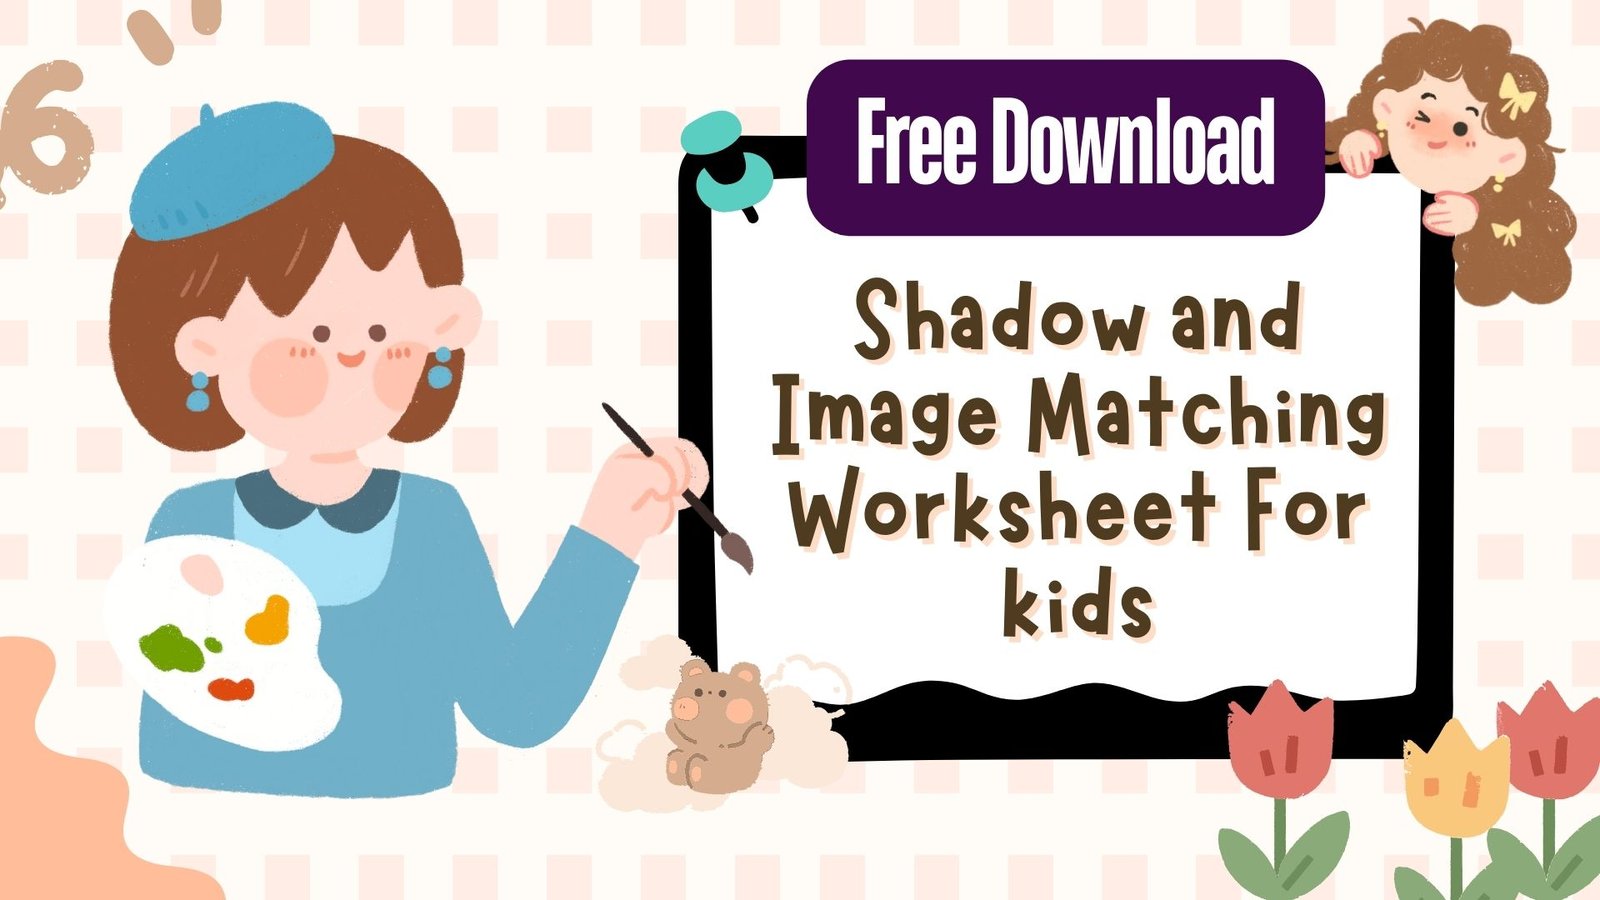 Shadow and Image Matching Worksheet For kids